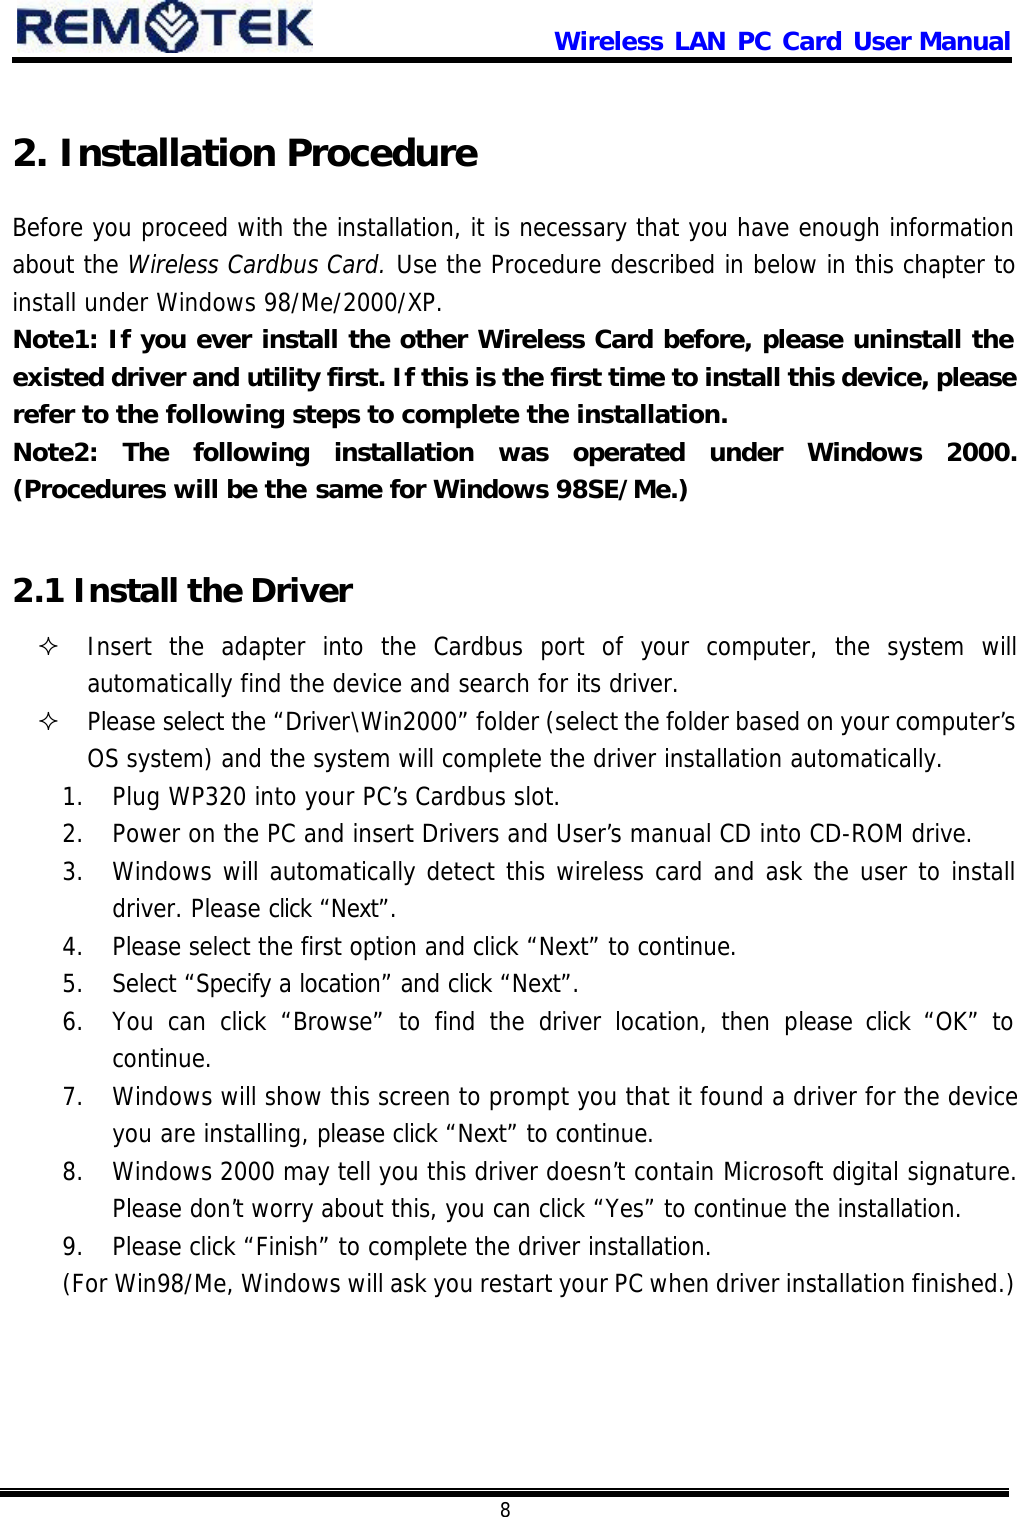                      Wireless LAN PC Card User Manual            8  2. Installation Procedure Before you proceed with the installation, it is necessary that you have enough information about the Wireless Cardbus Card. Use the Procedure described in below in this chapter to install under Windows 98/Me/2000/XP.  Note1: If you ever install the other Wireless Card before, please uninstall the existed driver and utility first. If this is the first time to install this device, please refer to the following steps to complete the installation. Note2: The following installation was operated under Windows 2000. (Procedures will be the same for Windows 98SE/Me.)  2.1 Install the Driver ² Insert the adapter into the Cardbus port of your computer, the system will automatically find the device and search for its driver. ² Please select the “Driver\Win2000” folder (select the folder based on your computer’s  OS system) and the system will complete the driver installation automatically. 1. Plug WP320 into your PC’s Cardbus slot. 2. Power on the PC and insert Drivers and User’s manual CD into CD-ROM drive. 3. Windows will automatically detect this wireless card and ask the user to install driver. Please click “Next”. 4. Please select the first option and click “Next” to continue. 5. Select “Specify a location” and click “Next”. 6. You can click “Browse” to find the driver location, then please click “OK” to continue. 7. Windows will show this screen to prompt you that it found a driver for the device you are installing, please click “Next” to continue. 8. Windows 2000 may tell you this driver doesn’t contain Microsoft digital signature. Please don’t  worry about this, you can click “Yes” to continue the installation. 9. Please click “Finish” to complete the driver installation.  (For Win98/Me, Windows will ask you restart your PC when driver installation finished.) 